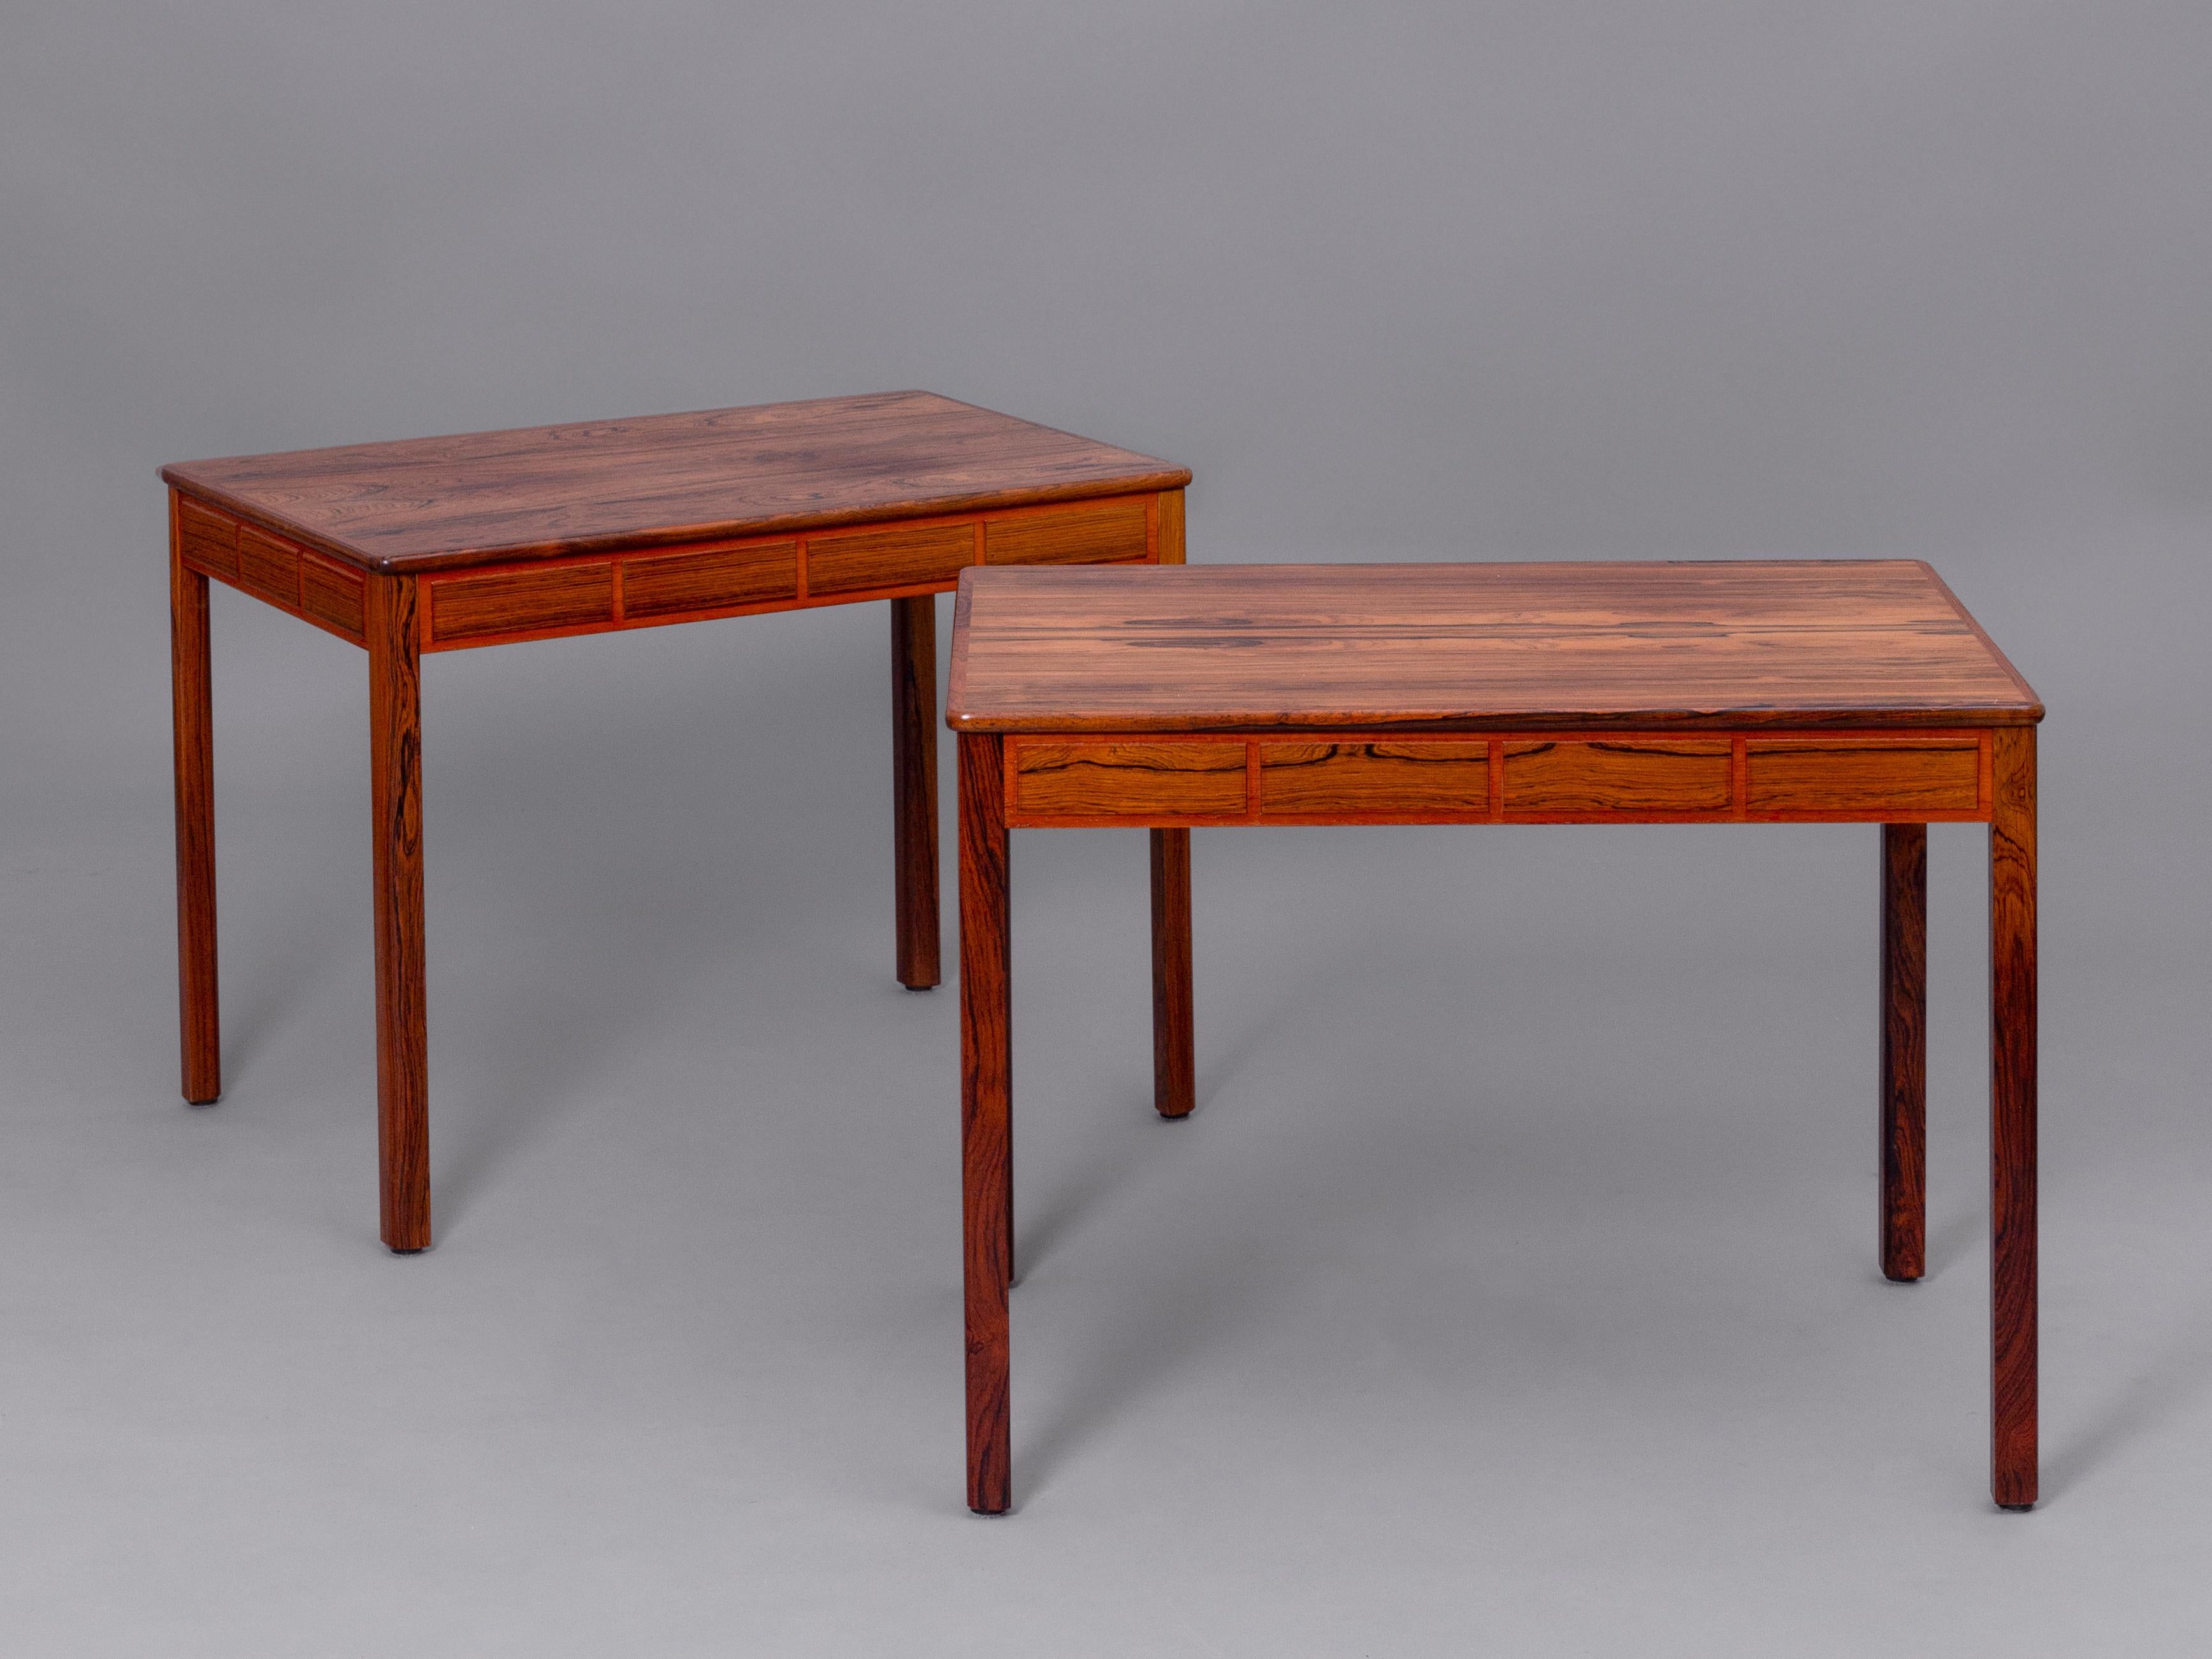 Pair of rosewood side tables designed by Yngvar Sandström for Säffle Möblerfabrik. Sweden, 1960s. 
This design features an interesting wood insert on the sides of the table, providing a simple decoration within the Mid century style. Excellent